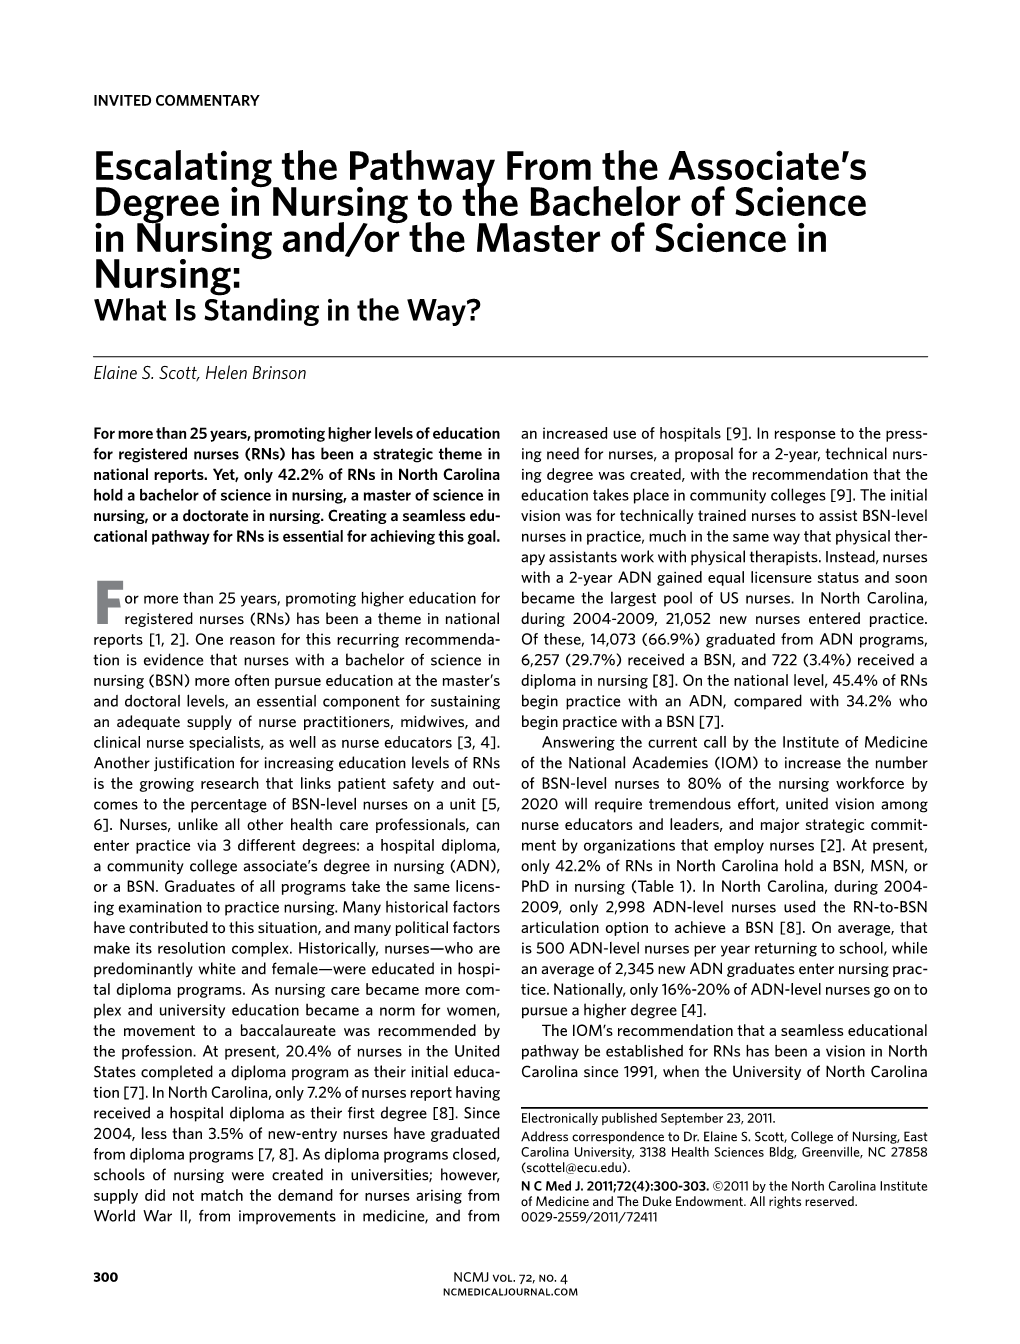 Escalating the Pathway from the Associate's Degree in Nursing To